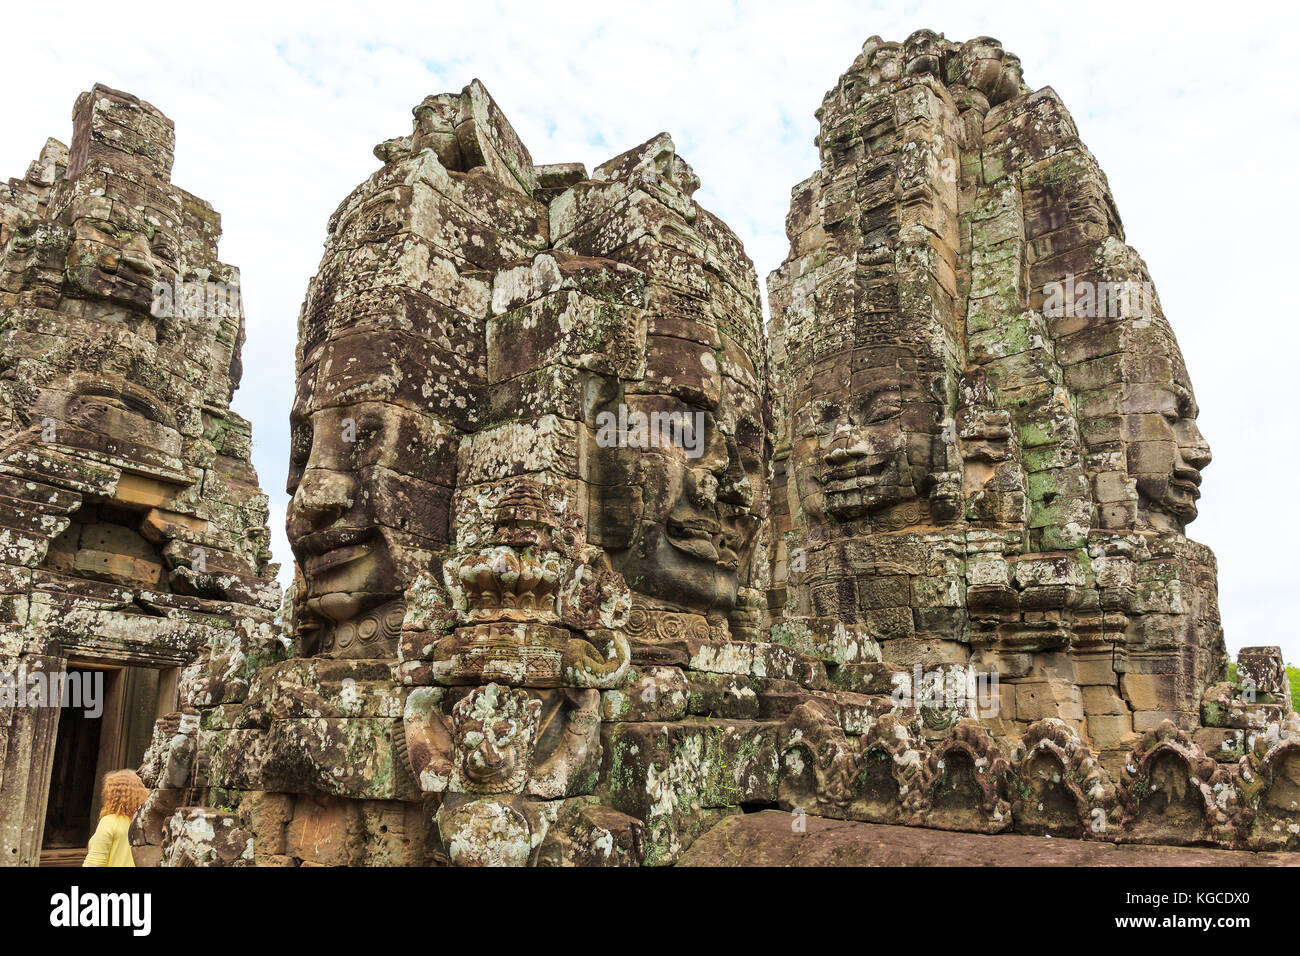 The Bayon, Also Known As Prasat Bayon, One of The Well-Known Temple in Cambodia. Stock Photo